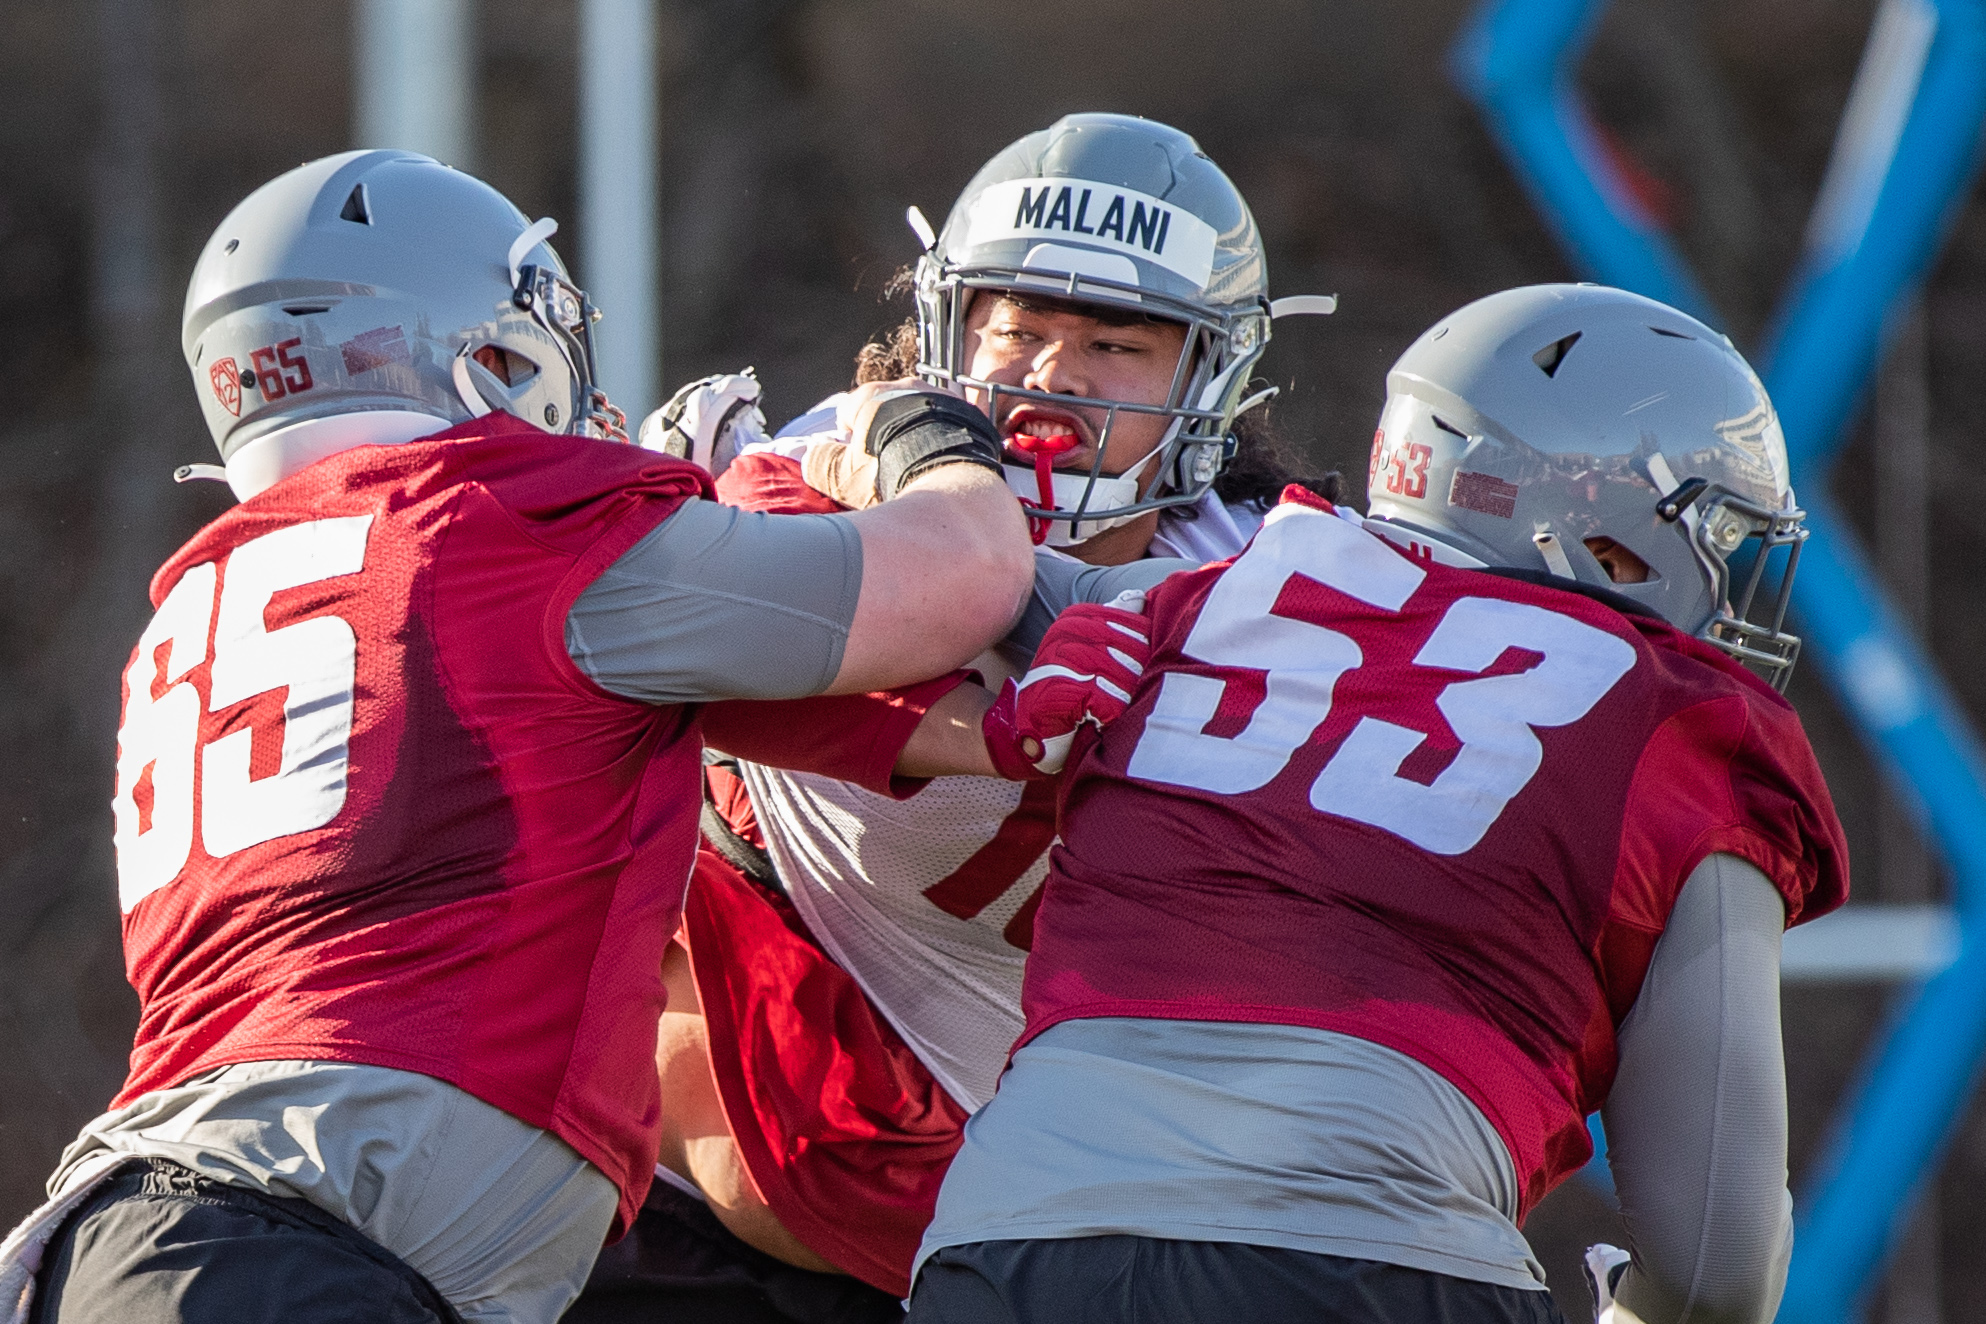 PULLMAN, WA - MARCH 24: Washington State Cougars football program takes to Rogers Field for spring practice